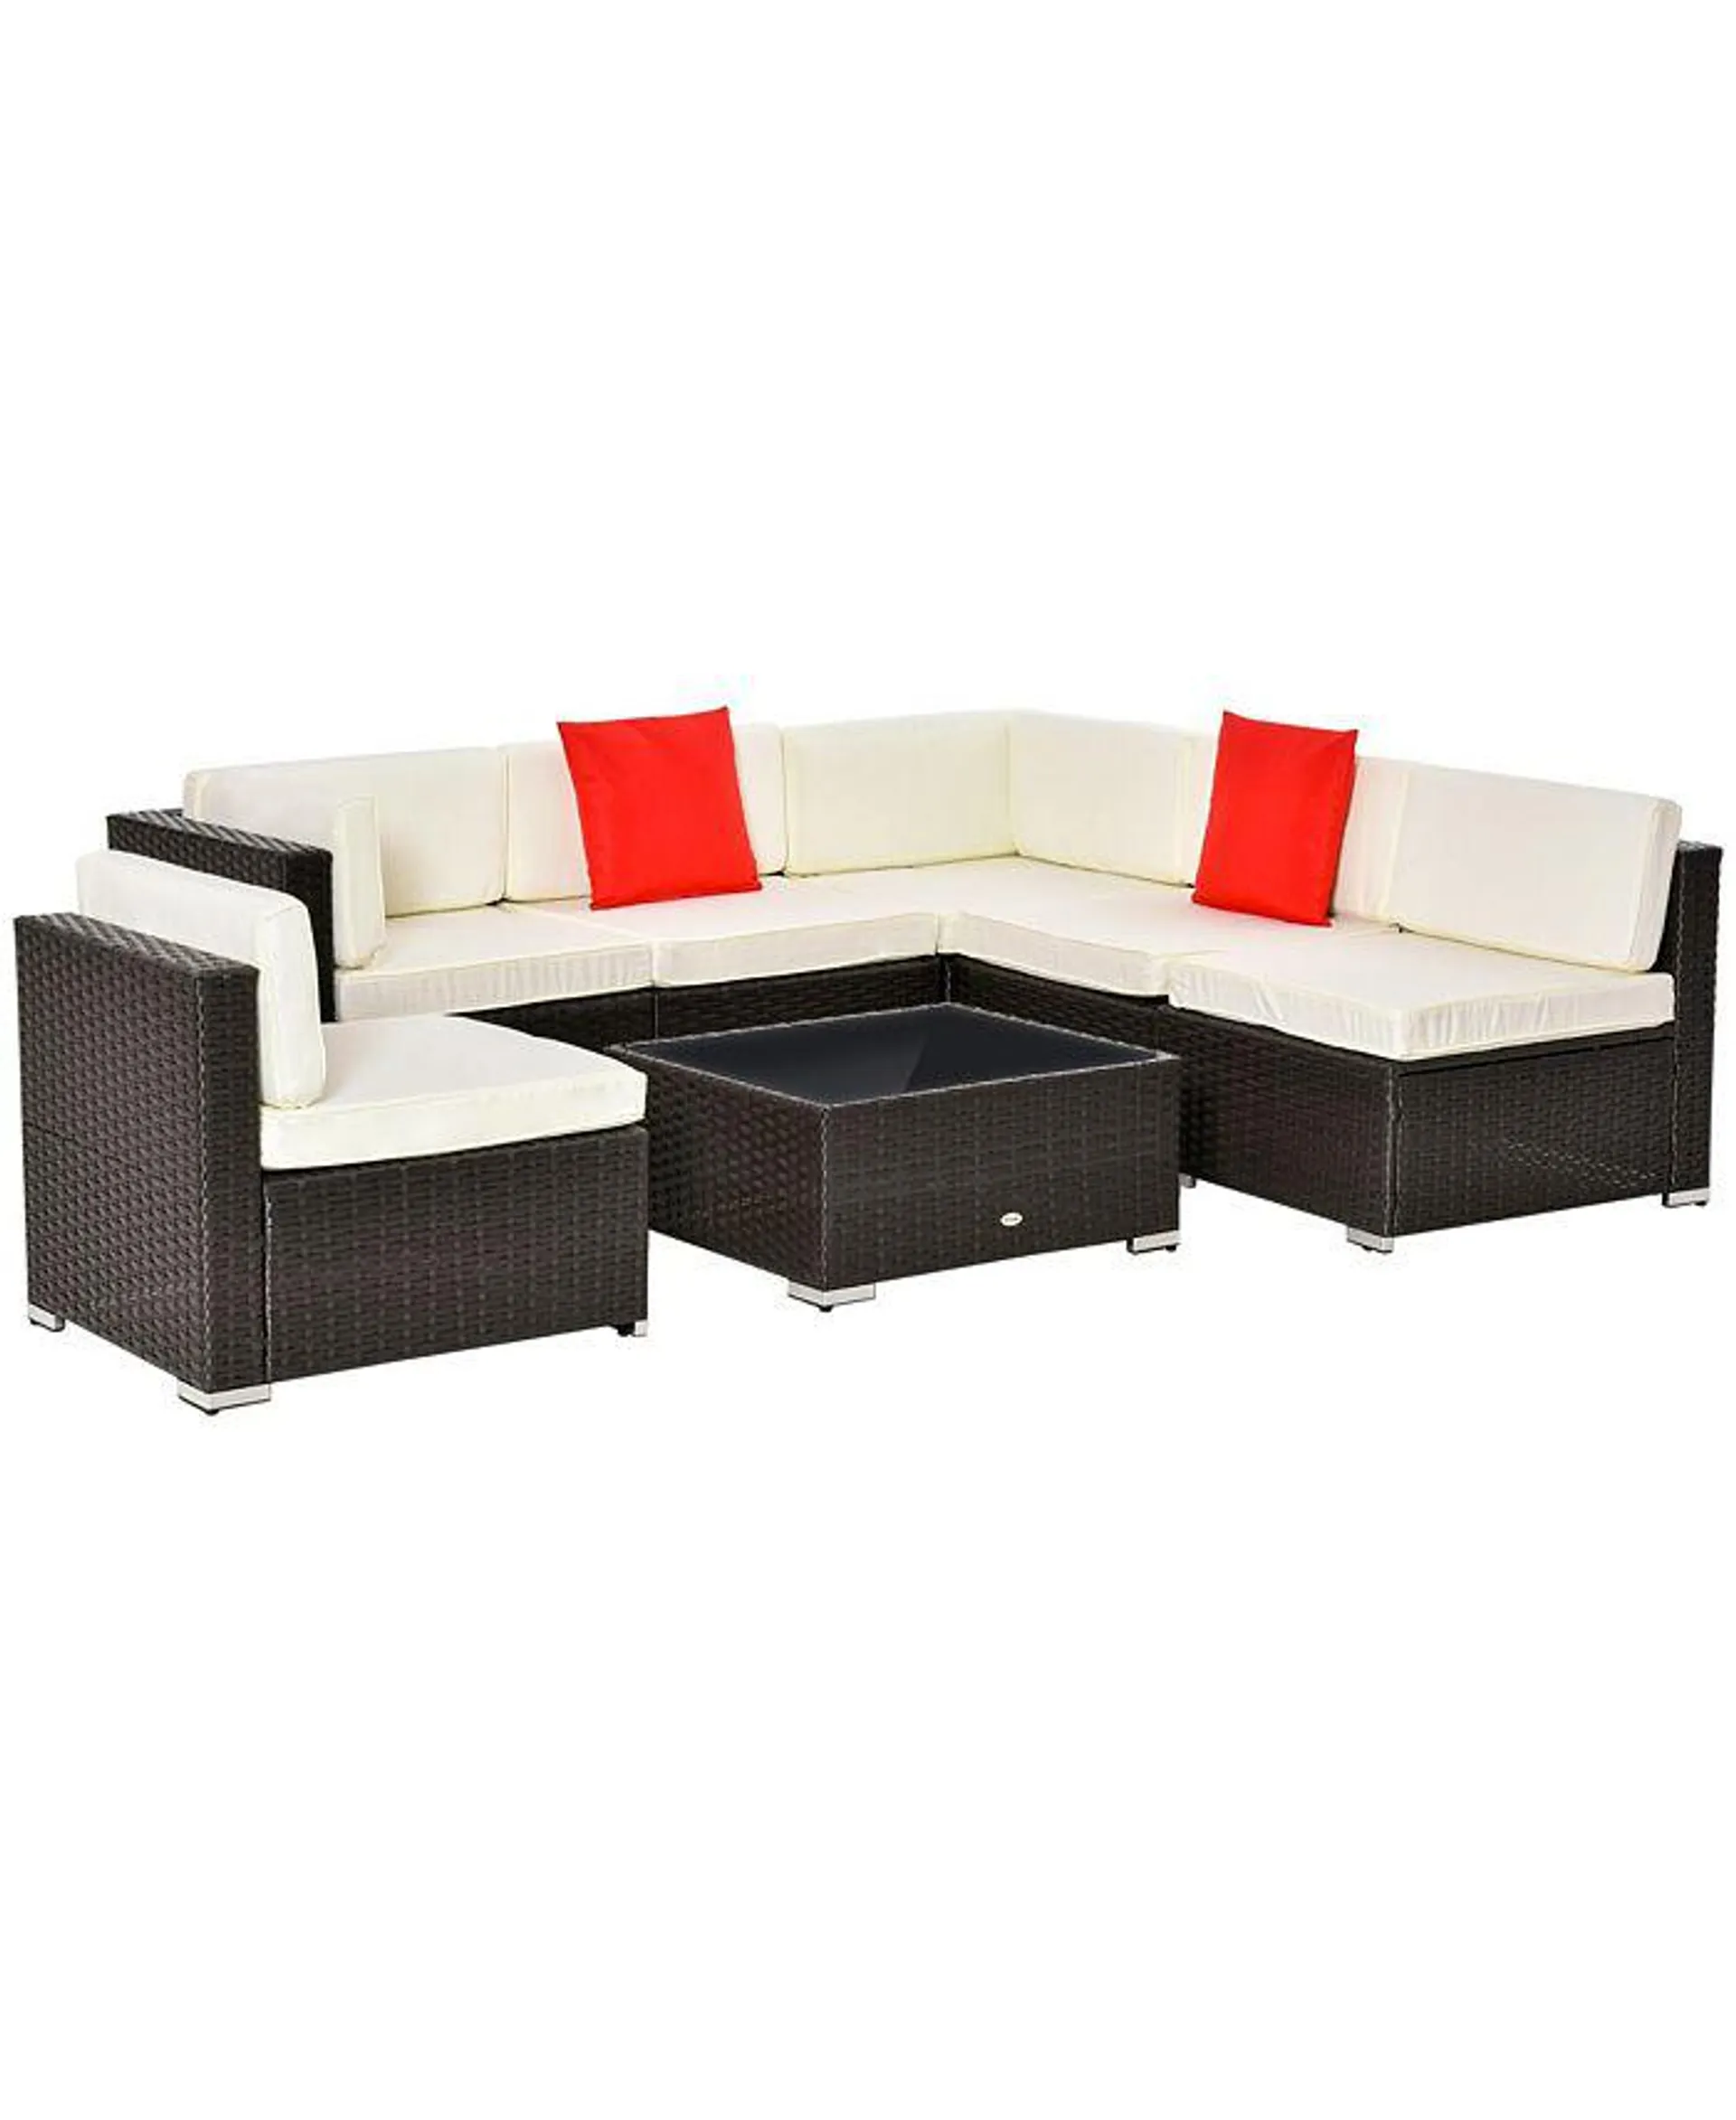 7-Piece Patio Furniture Sets Outdoor Wicker Conversation Sets All Weather PE Rattan Sectional sofa set with Cushions & Tempered Glass Desktop, Cream White